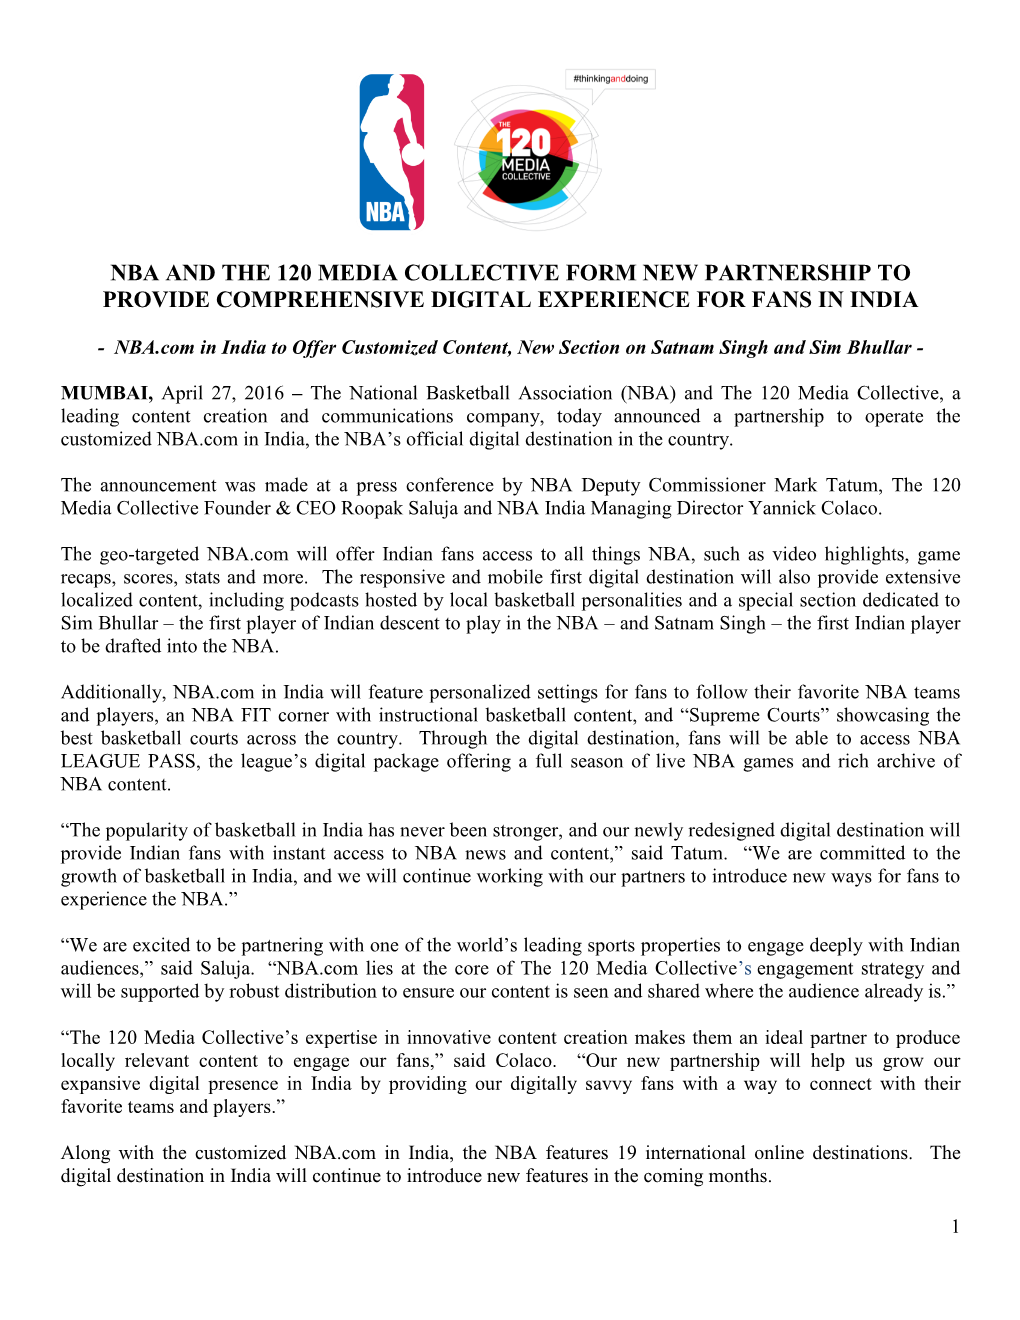 Nba and the 120 Media Collective Form New Partnership to Provide Comprehensive Digital Experience for Fans in India